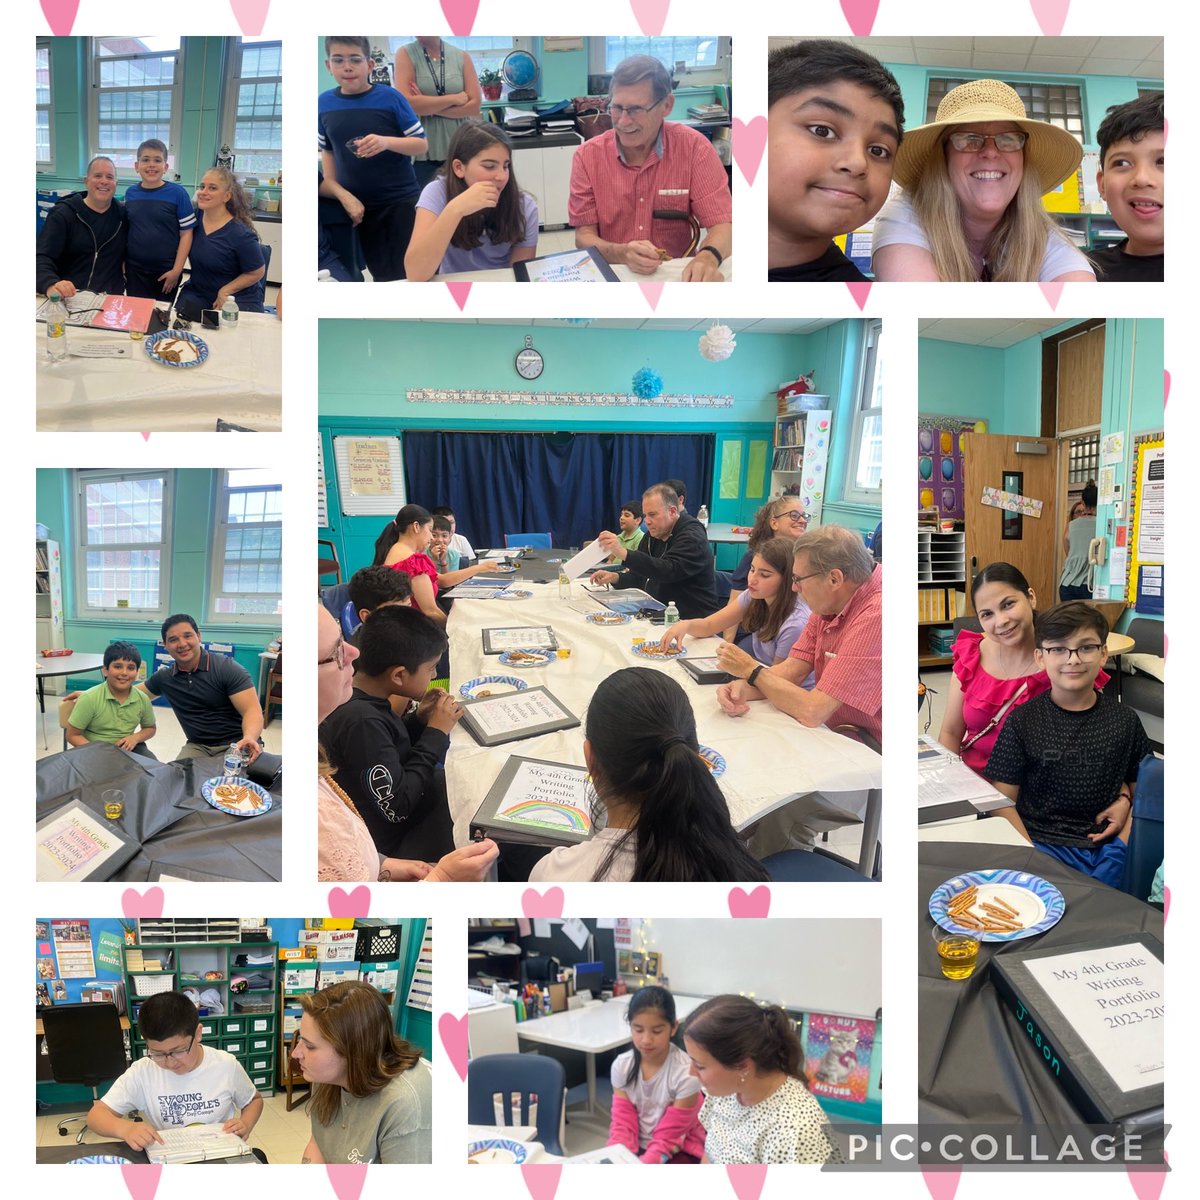 For our celebration of learning, we had an 📝 author’s tea, with 💕family, 🥰friends, and 🍪food! #MineolaProud ⁦@Jackson_Ave⁩ ⁦@MineolaUFSD⁩